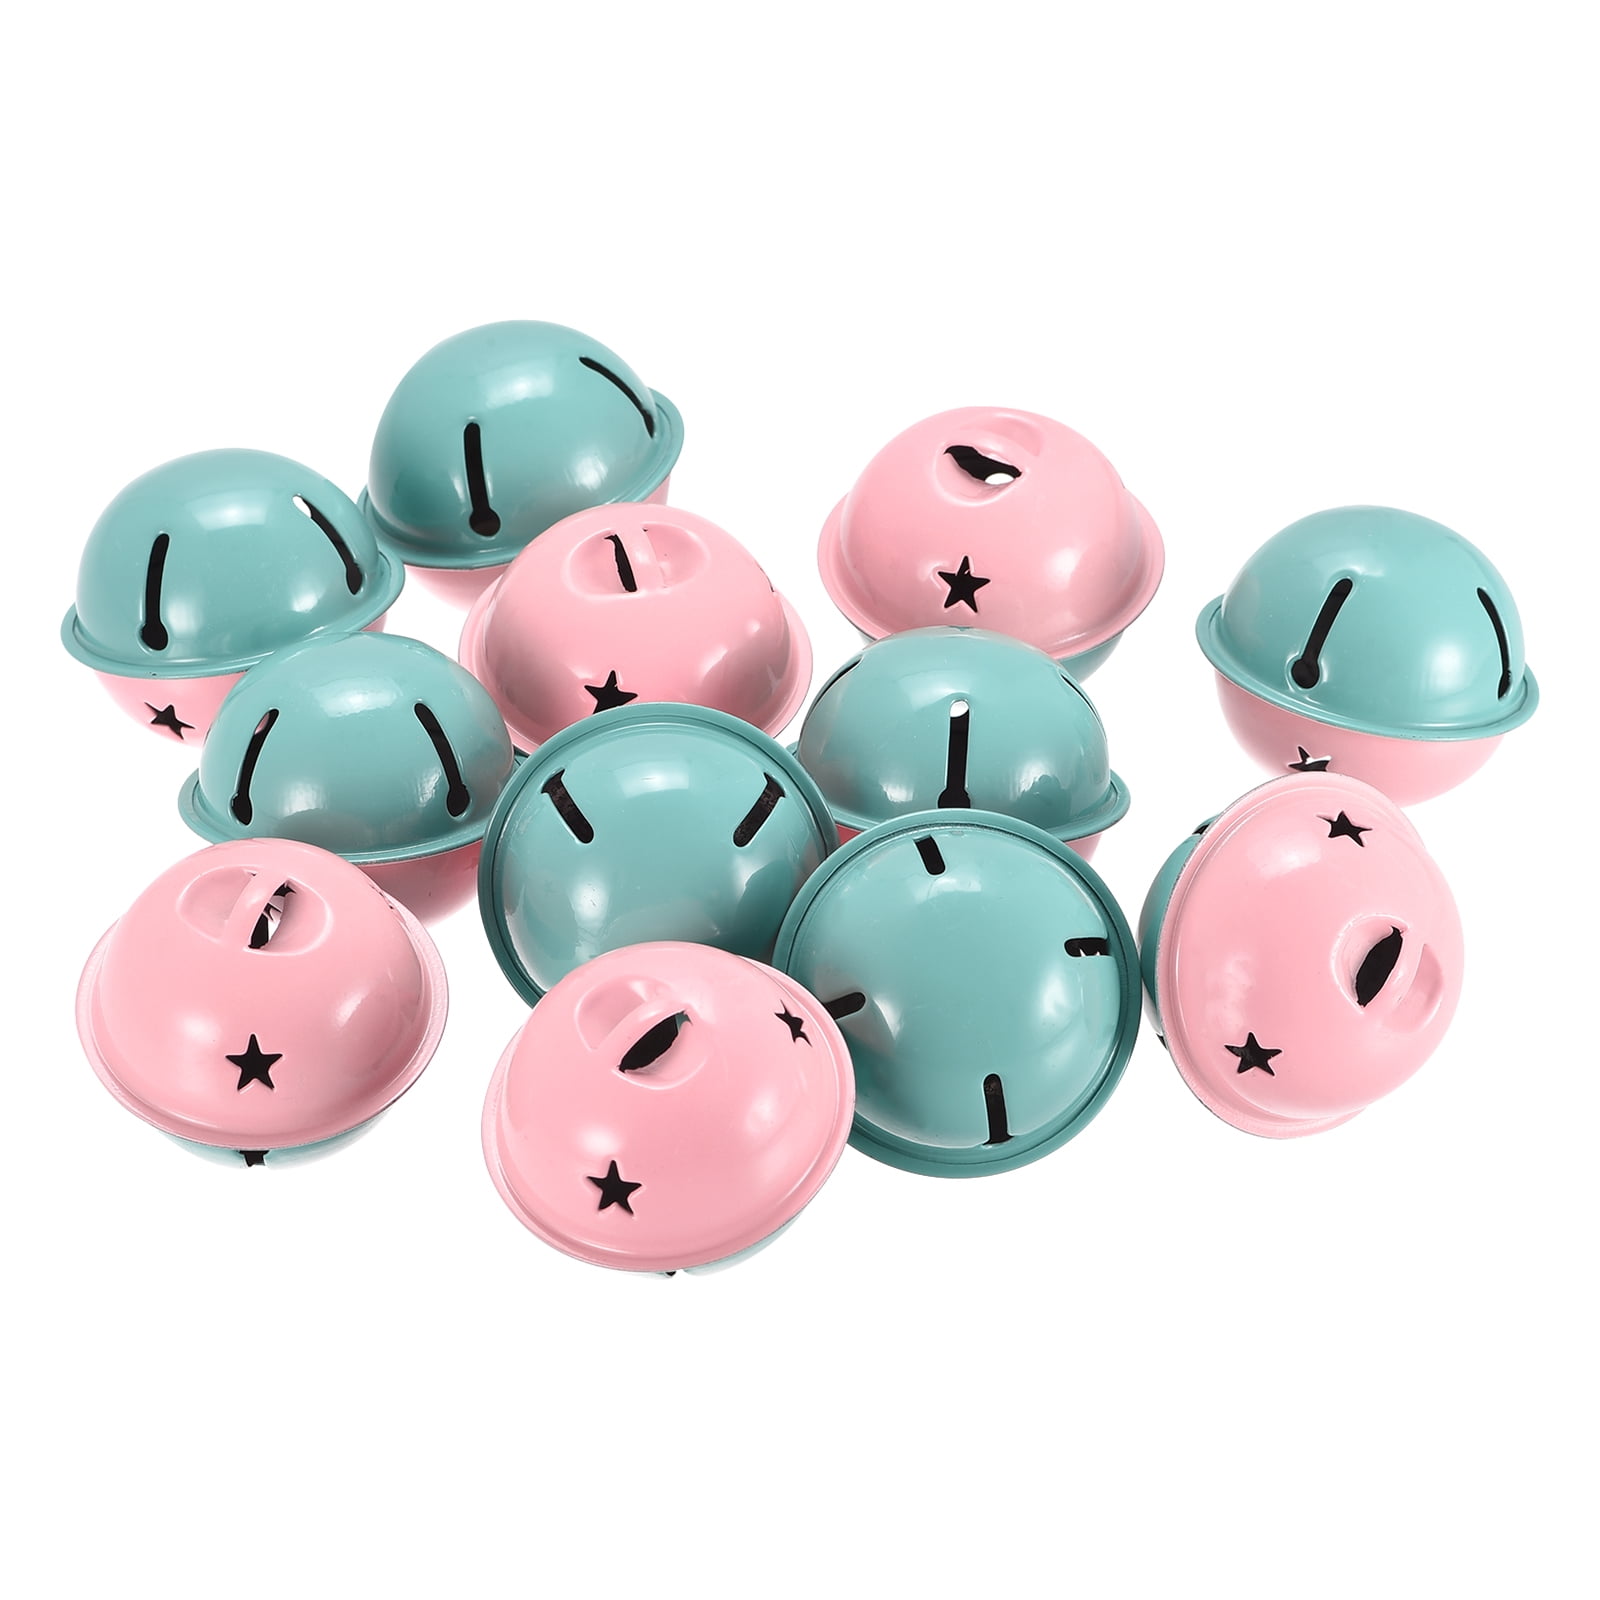 Jingle Bells, 3/8(10mm) 120 Pack Small Bells for Crafts DIY Christmas,  Blue 